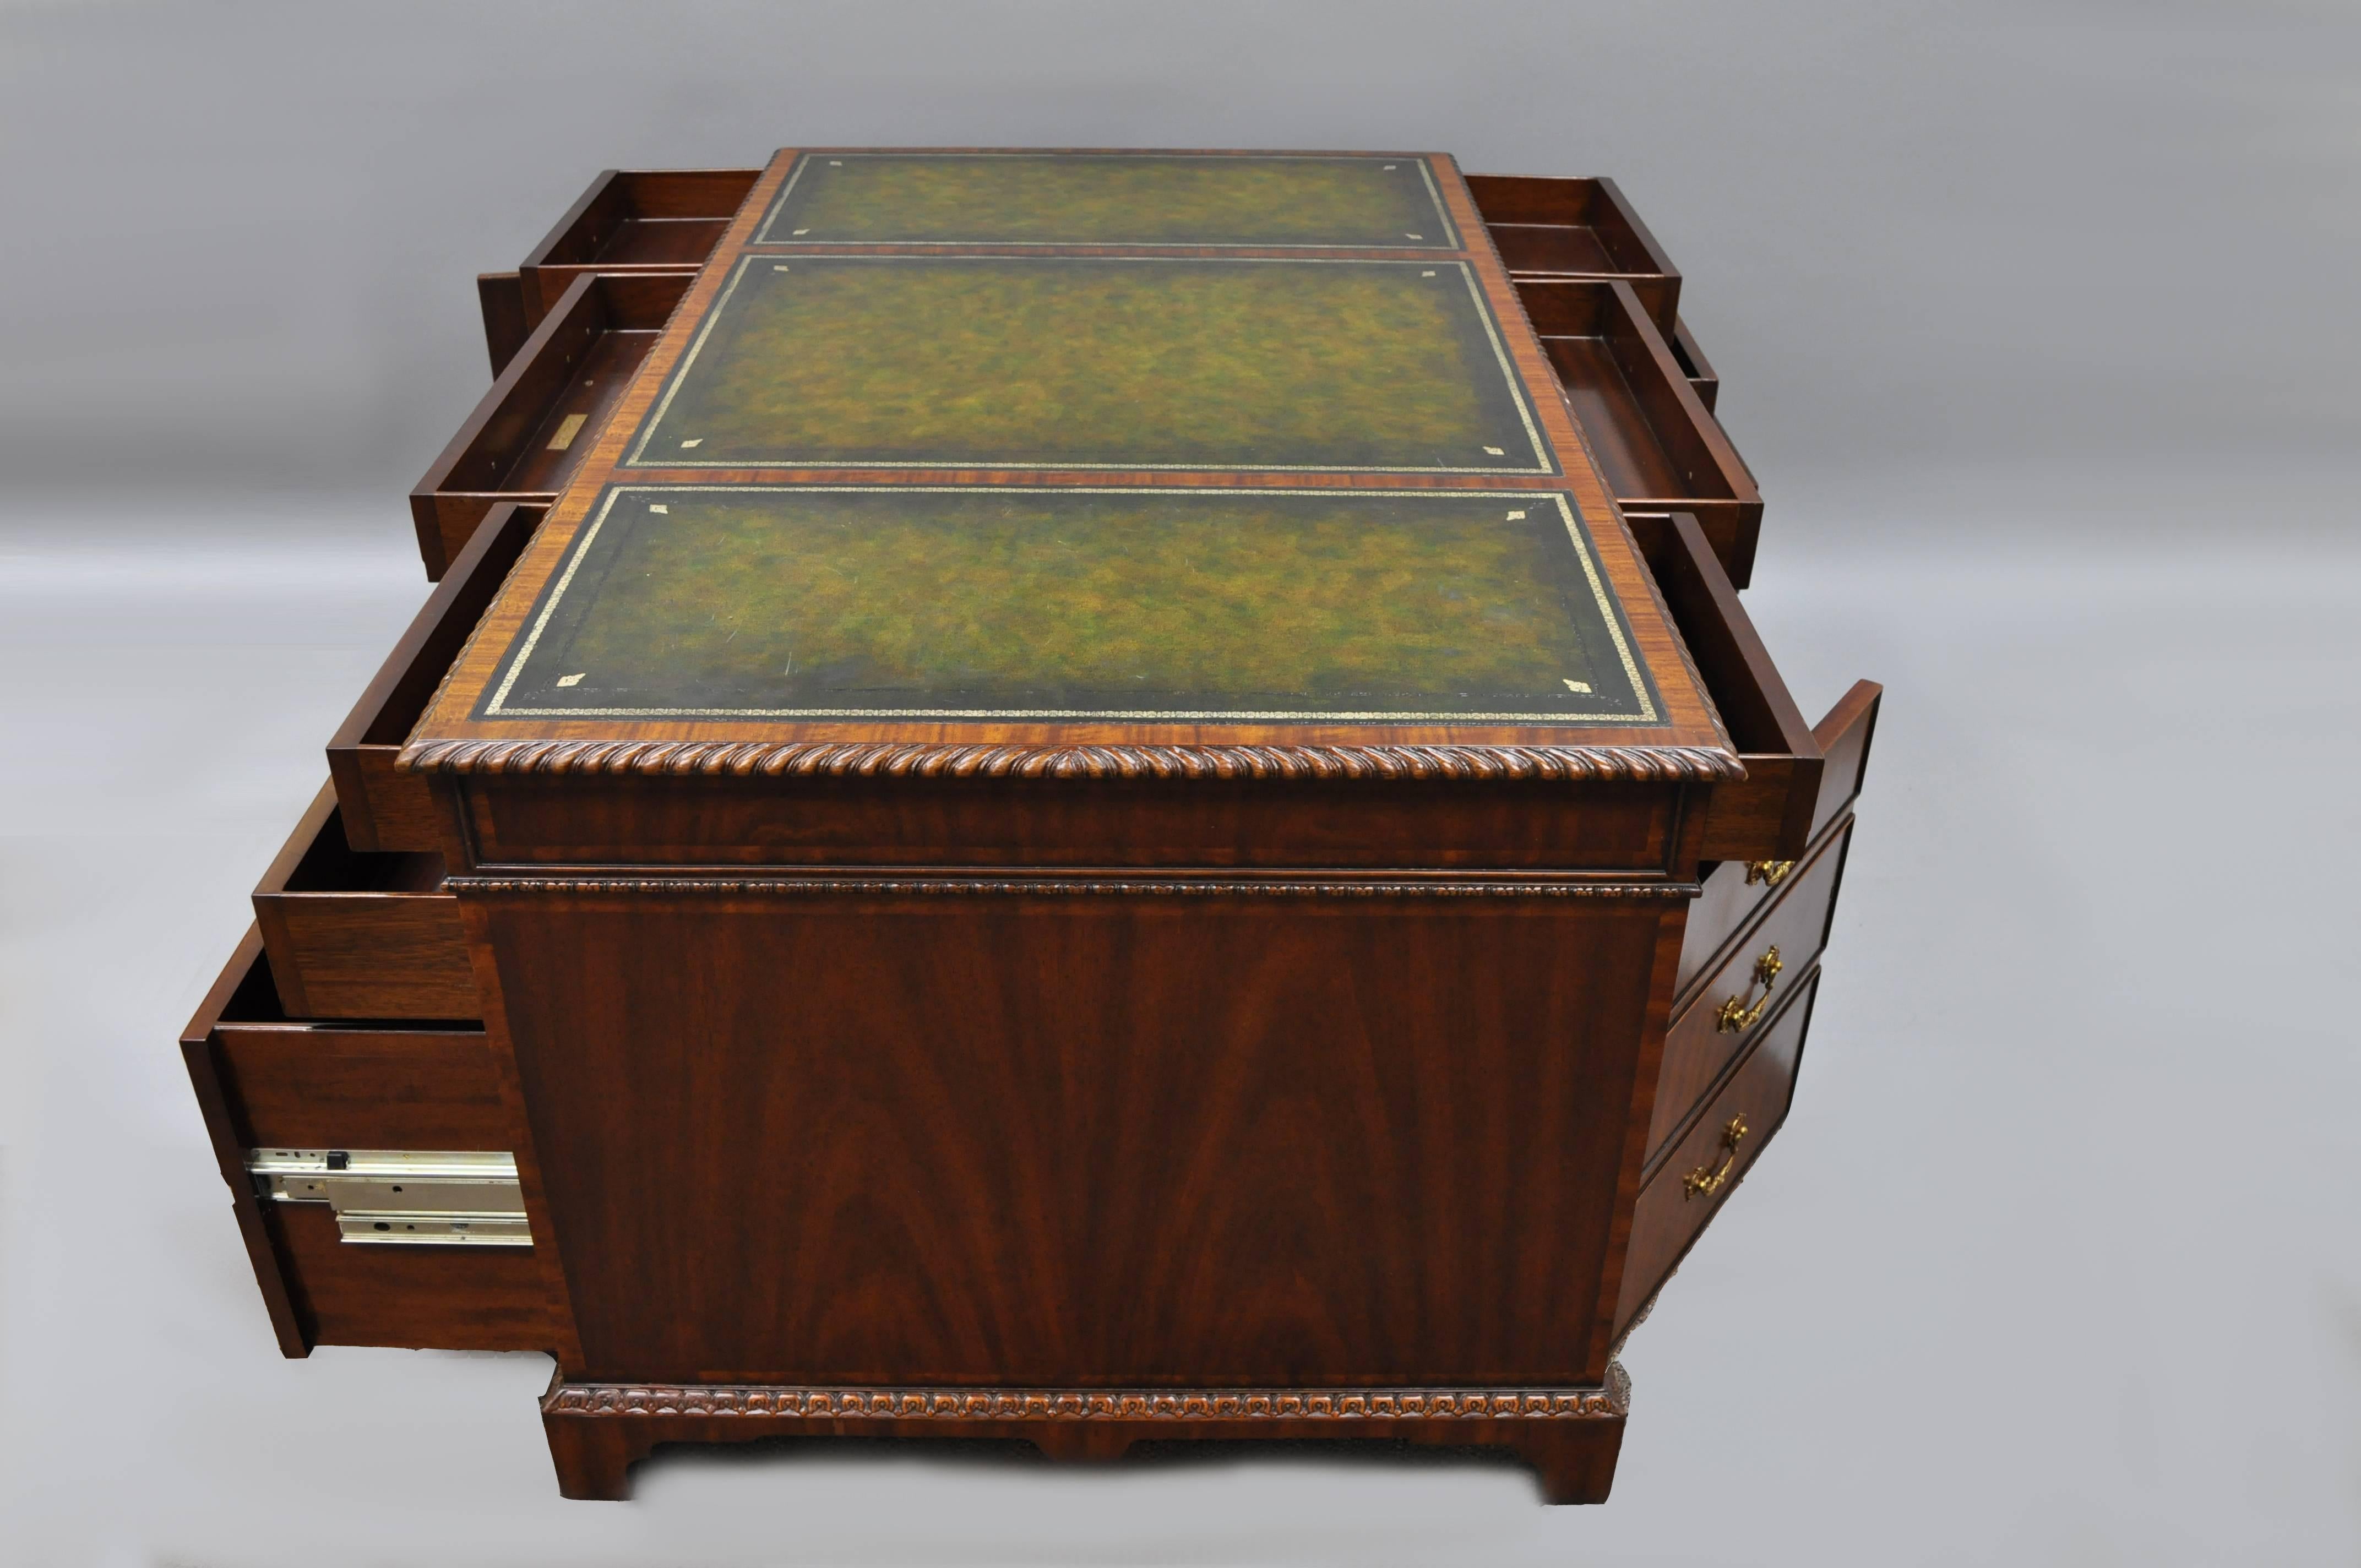 Stately Mahogany 3 part executive partners desk with green tooled leather top by Maitland-Smith with working drawers / doors on both sides. Item features five drawers and one-door on each side, green tooled leather top, carved rope edge, solid brass